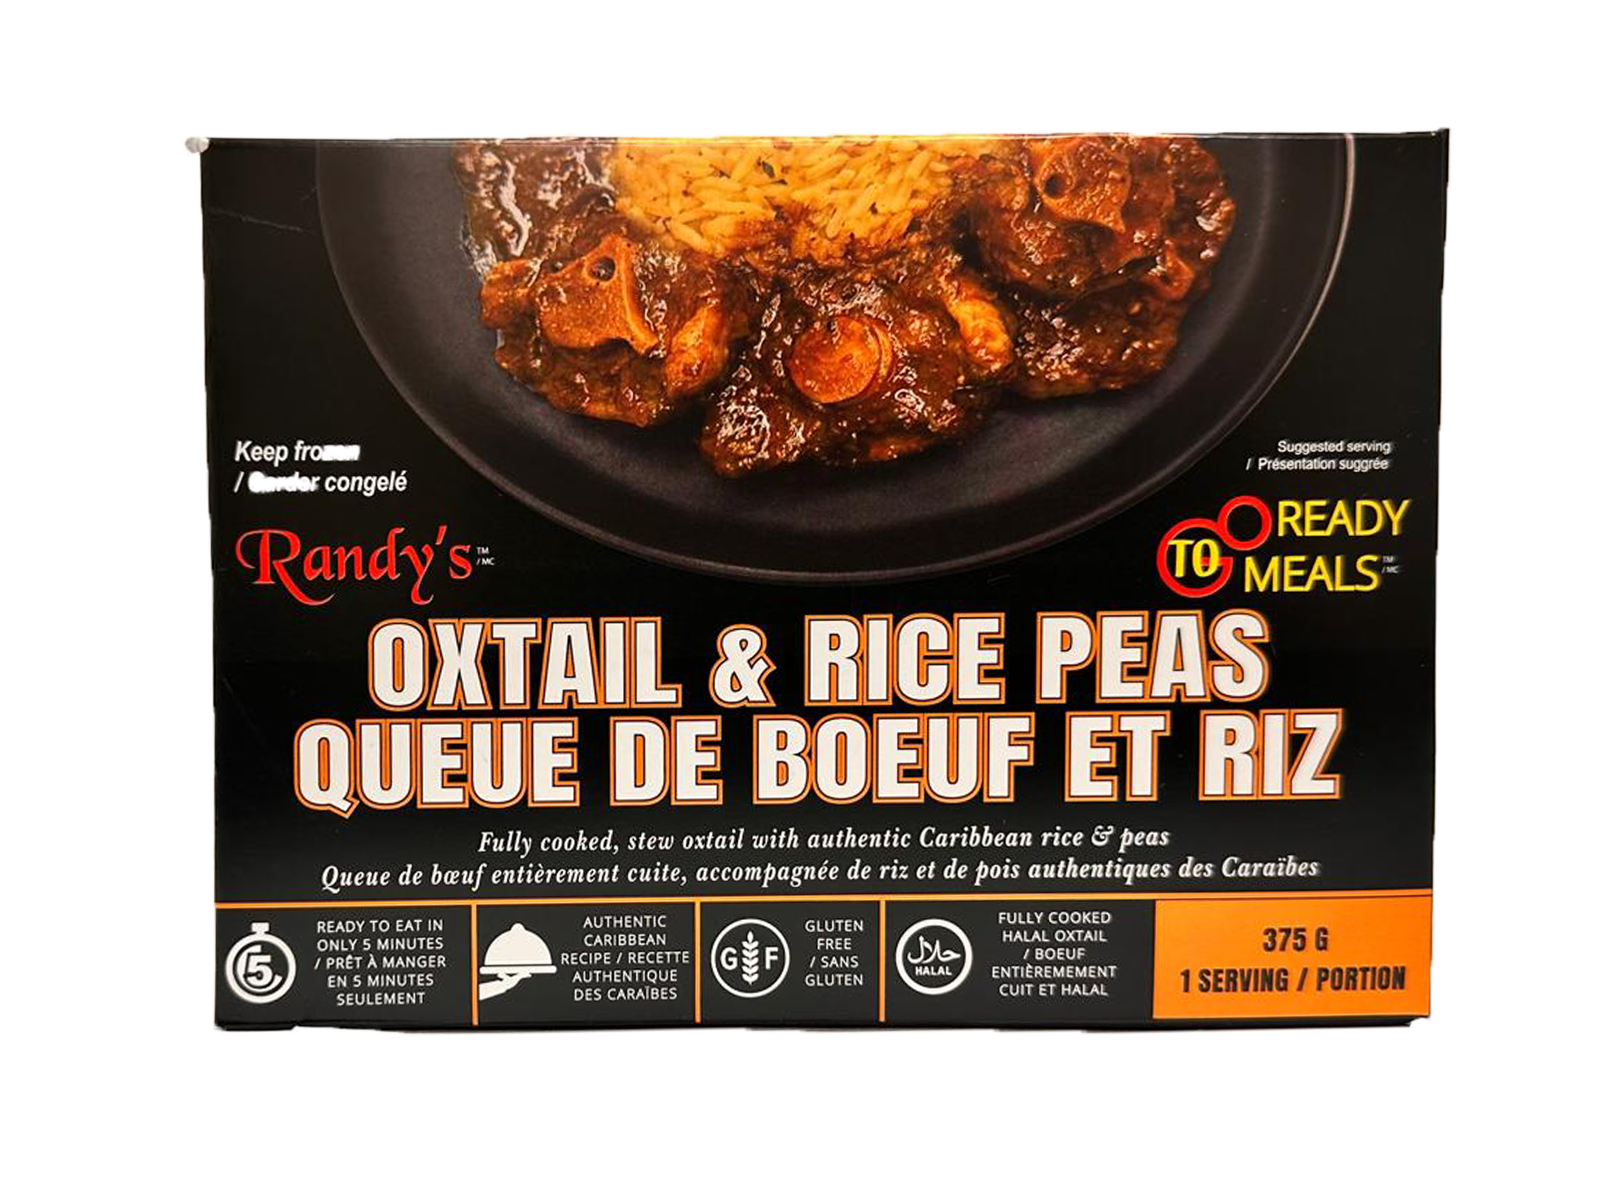 OxtailRice&Peas_Packaging